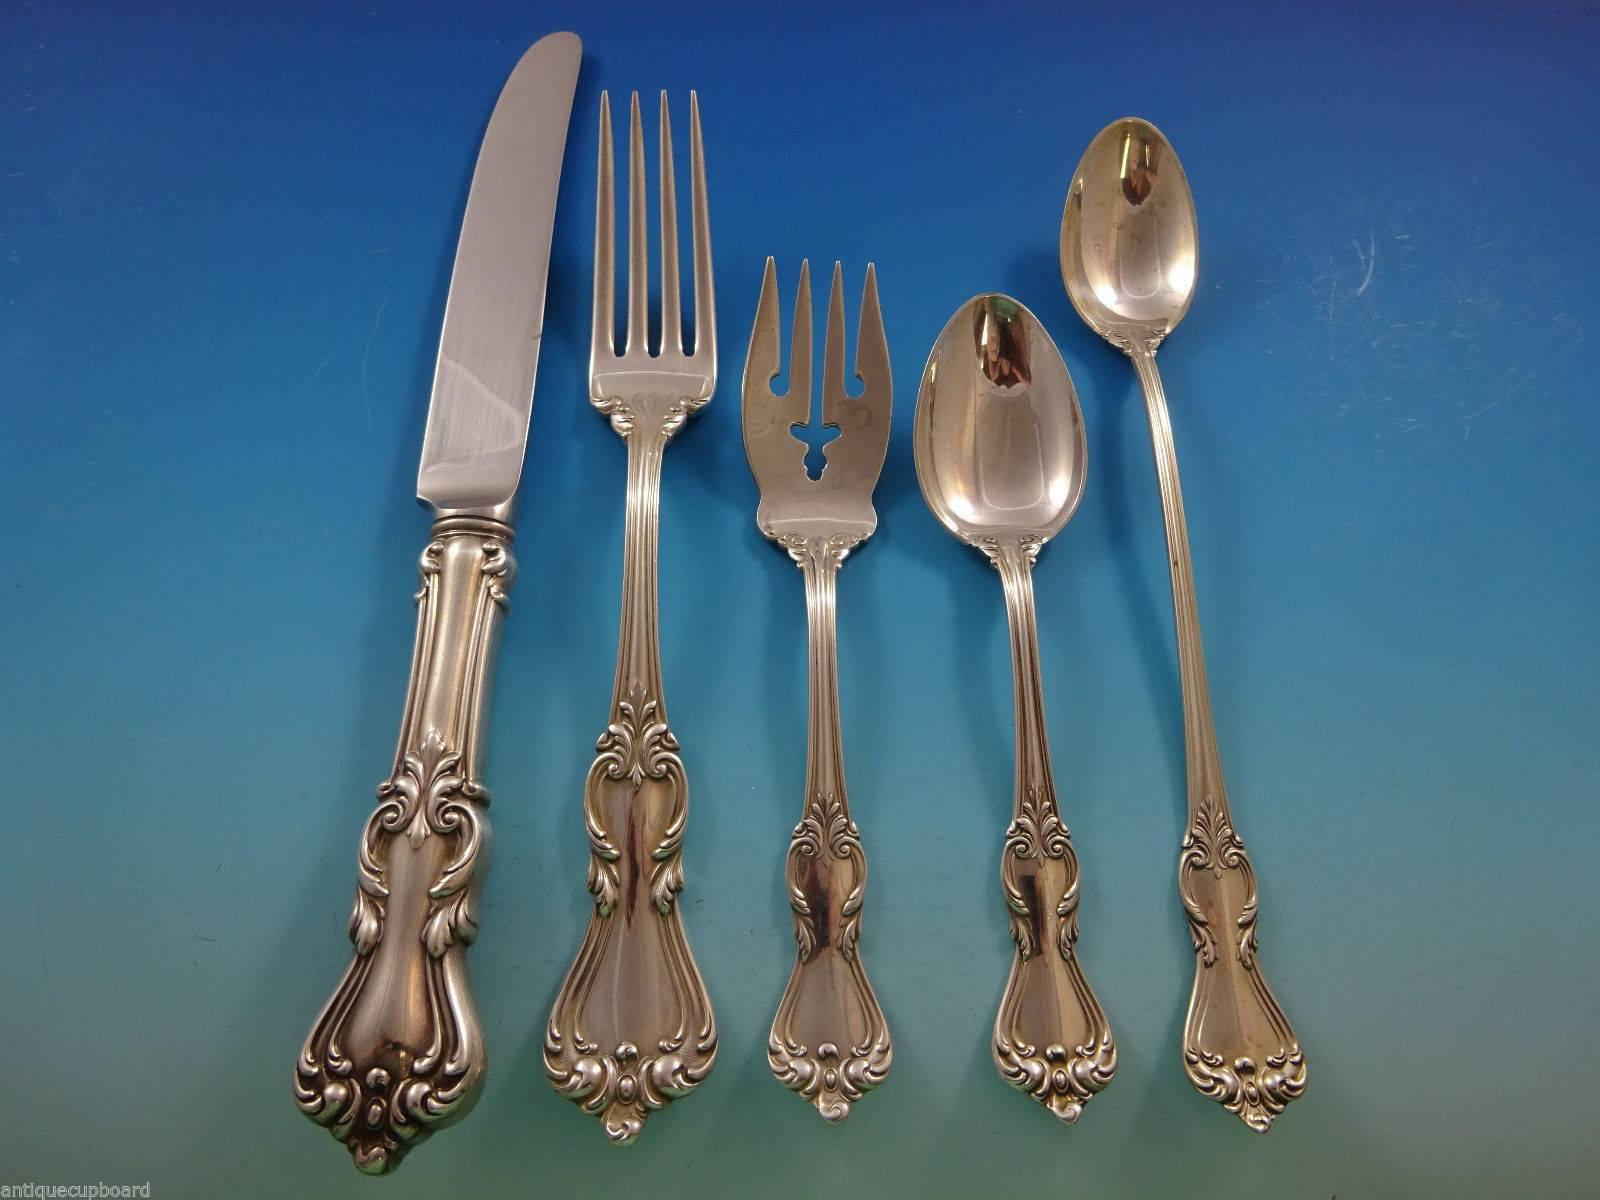 Marlborough by Reed & Barton dinner size sterling silver flatware set, 47 pieces. This set includes:

Eight dinner size knives, 9 5/8